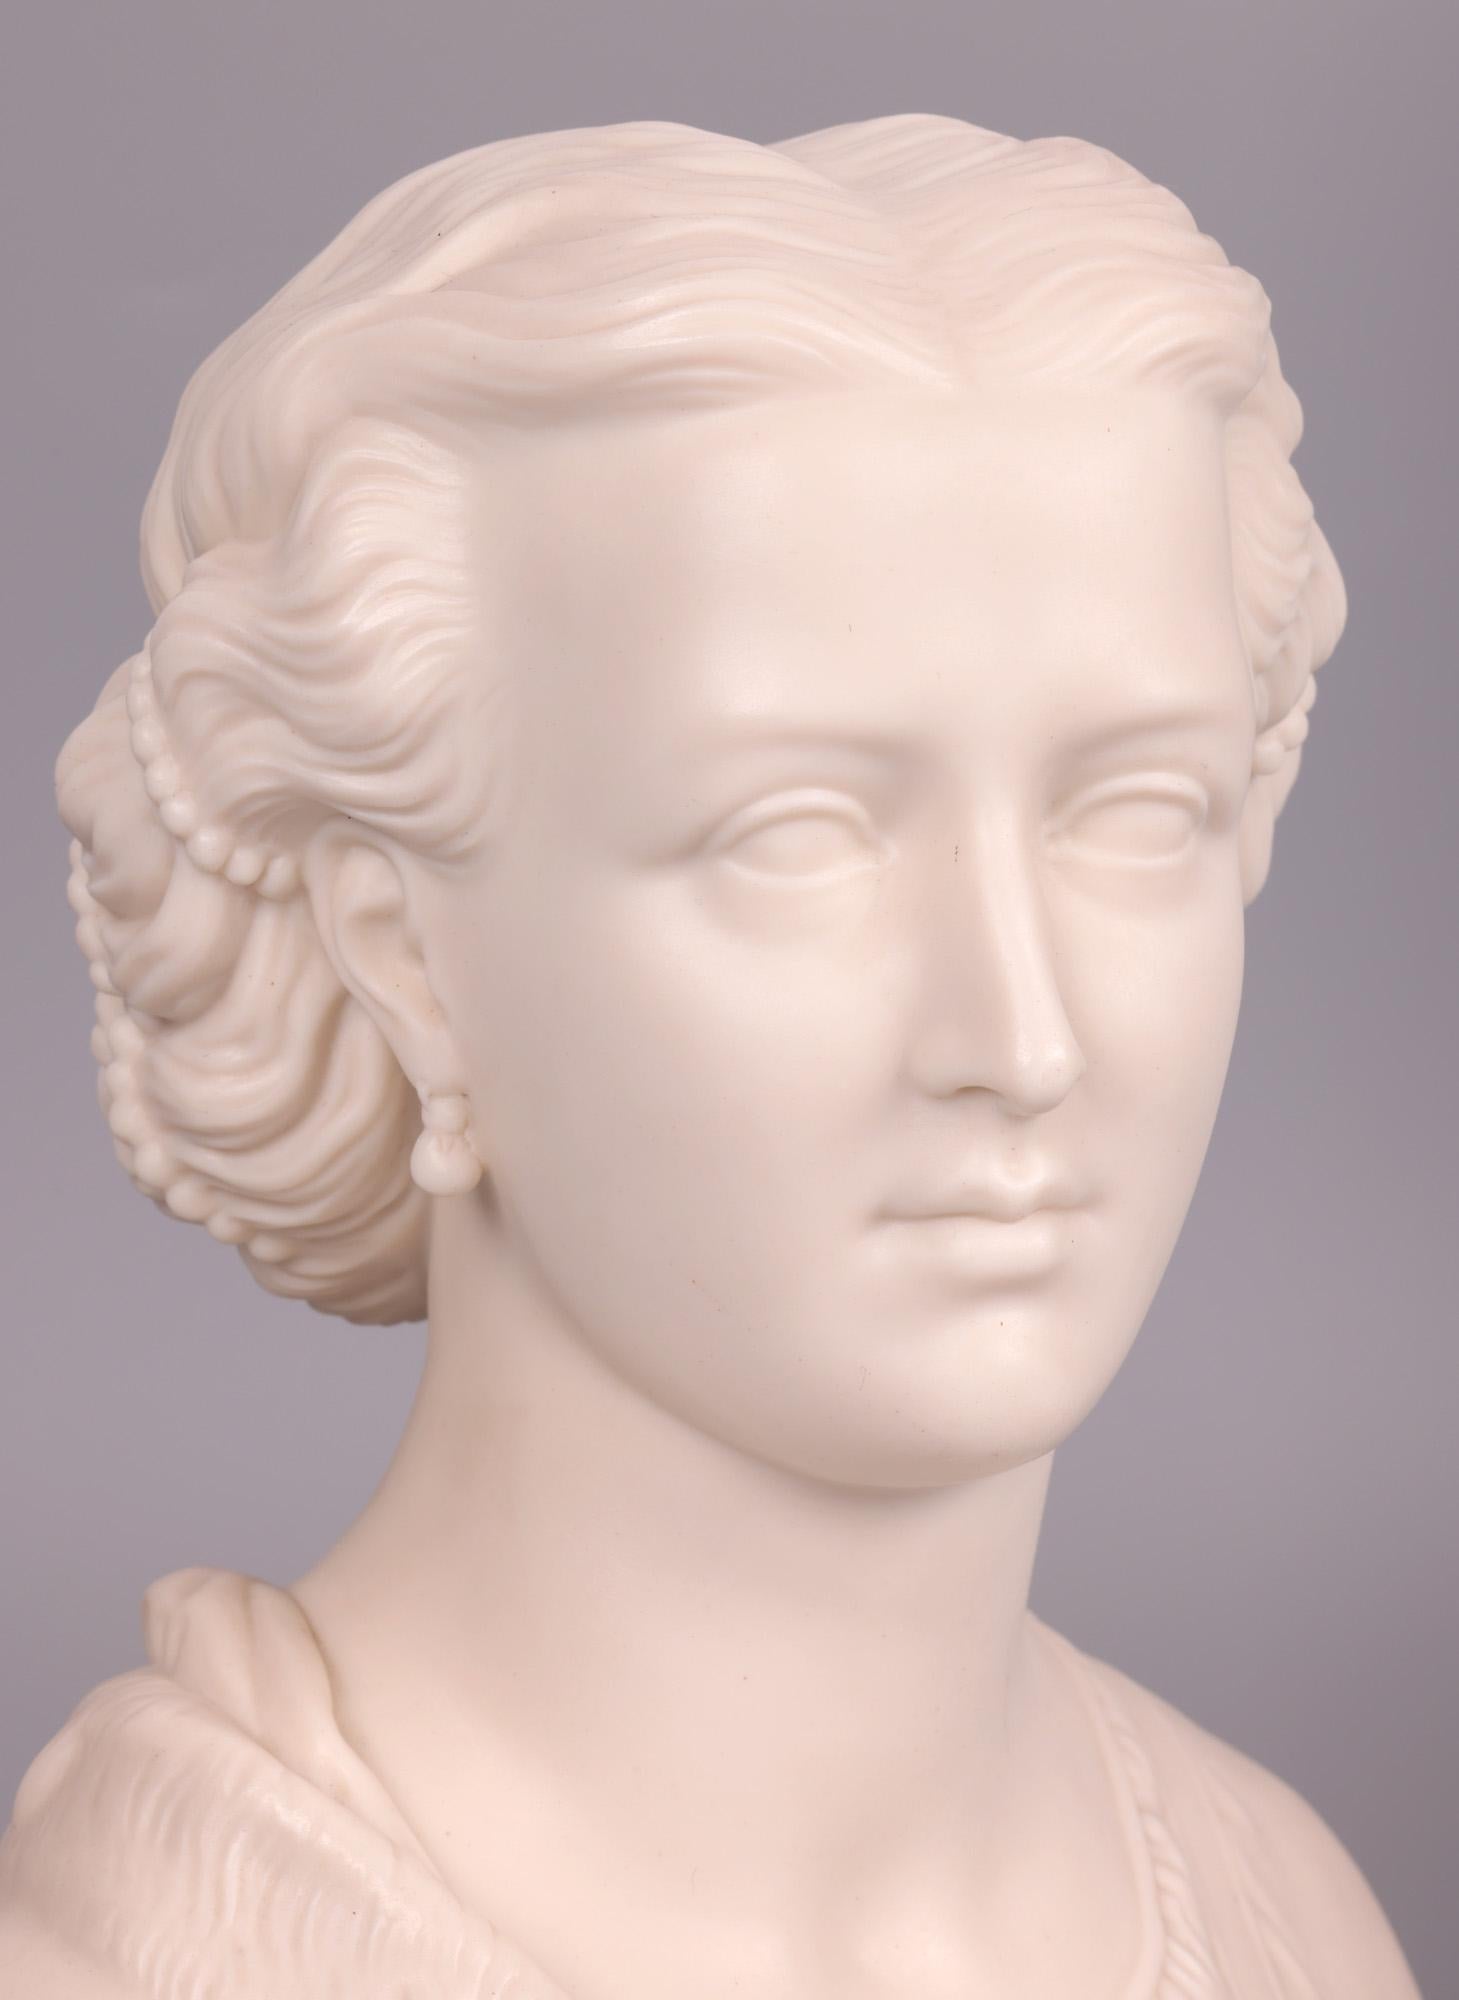 A very fine antique Copeland parian bust of the Princess of Wales sculpted by F.L. Miller for the the Crystal Palace Art Union and dated 1863. Probably made to commemorate the marriage of Albert Edward Prince of Wales to Princess Alexandra of